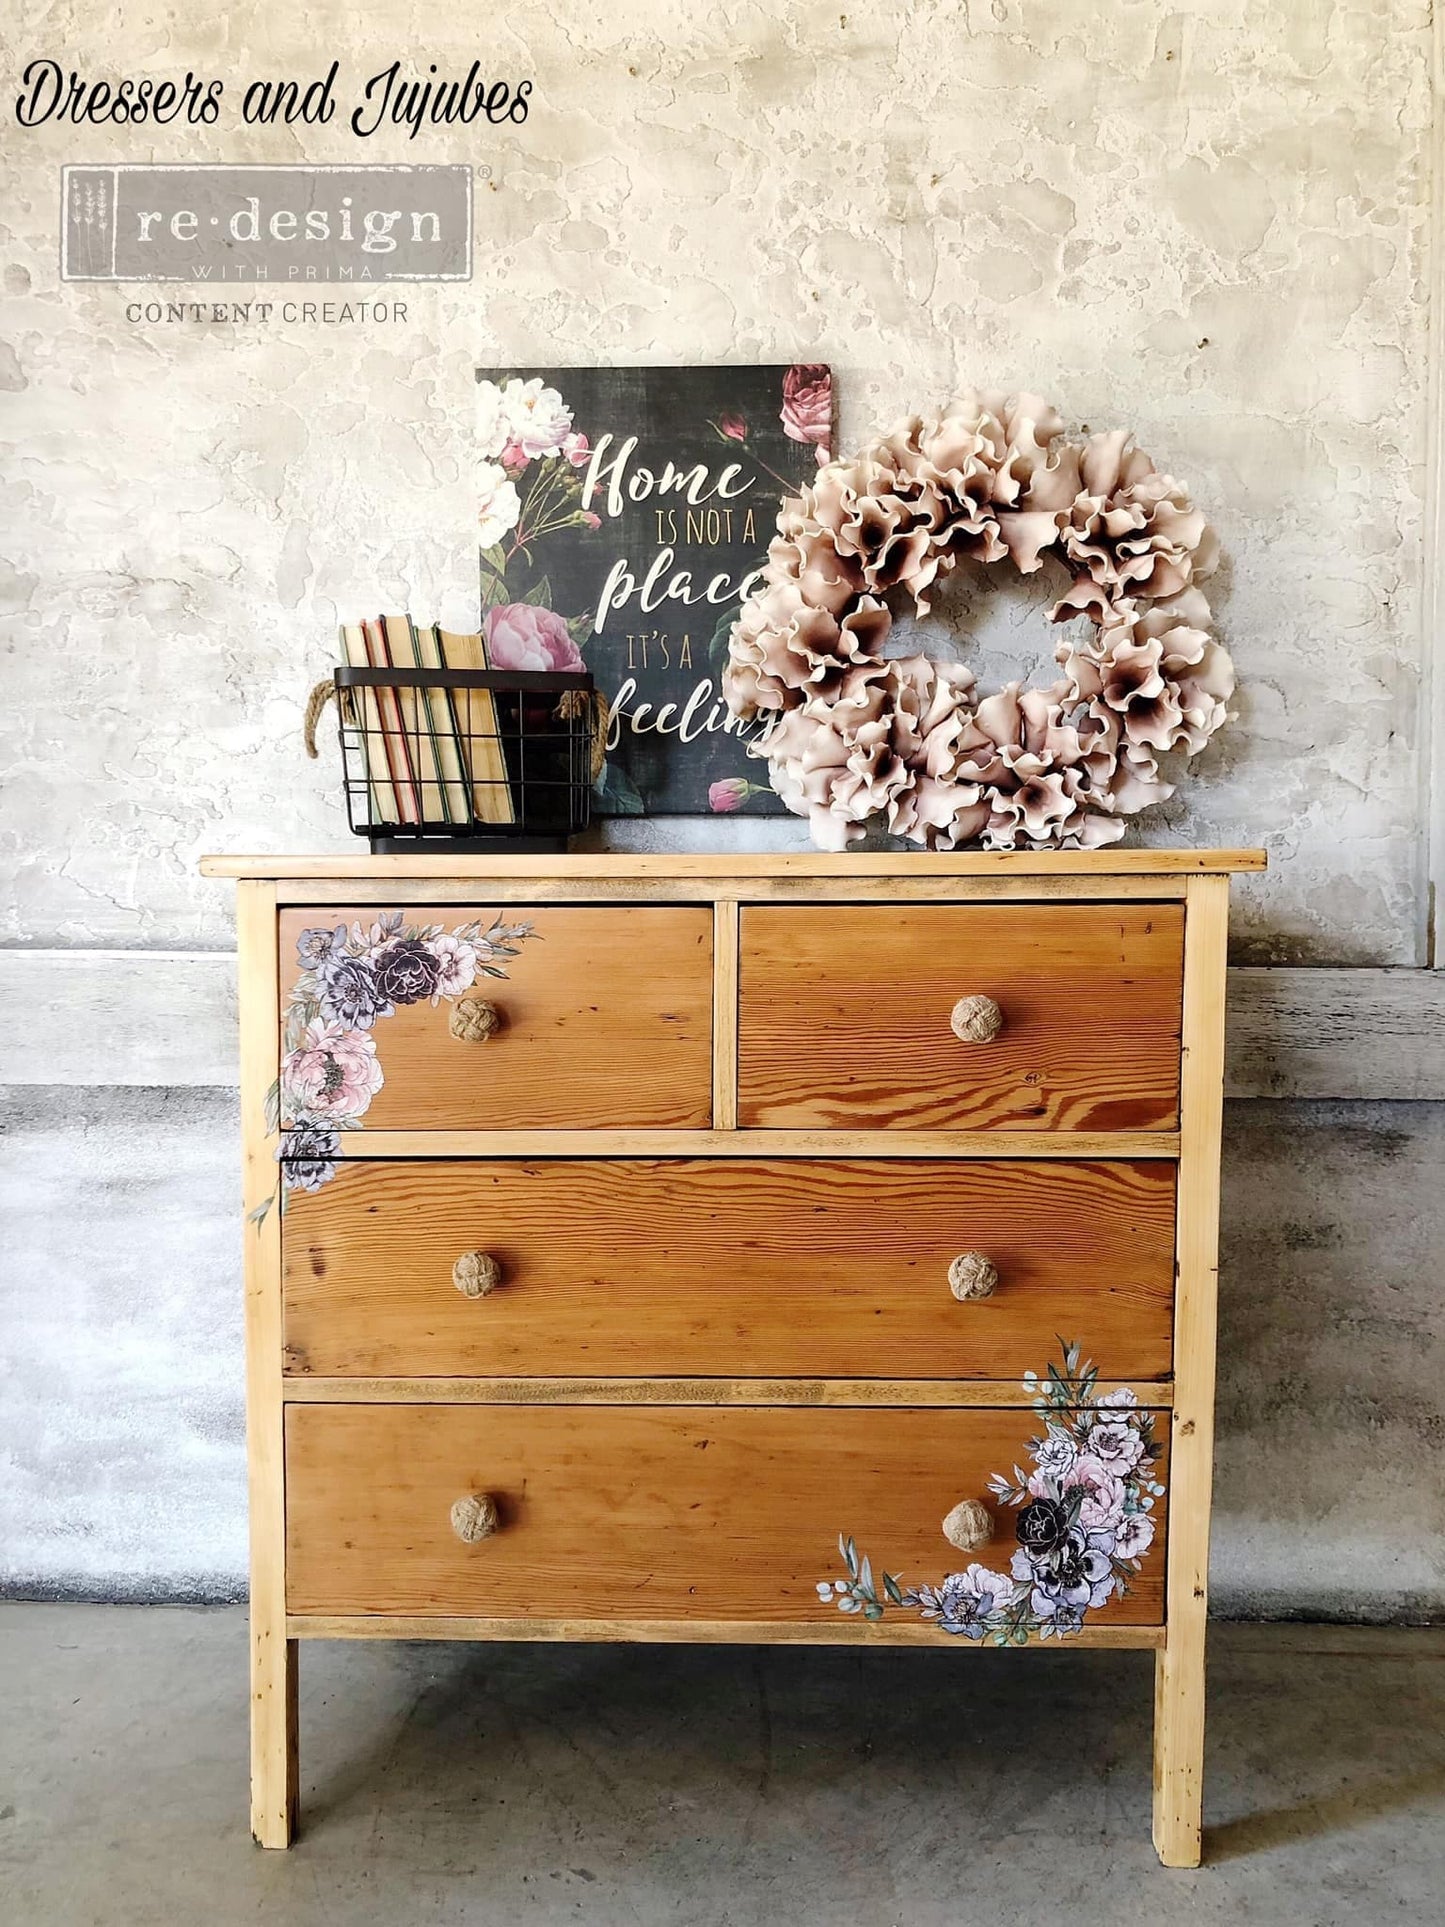 In the meadows - Redesign Décor Transfers® Vintage Paint